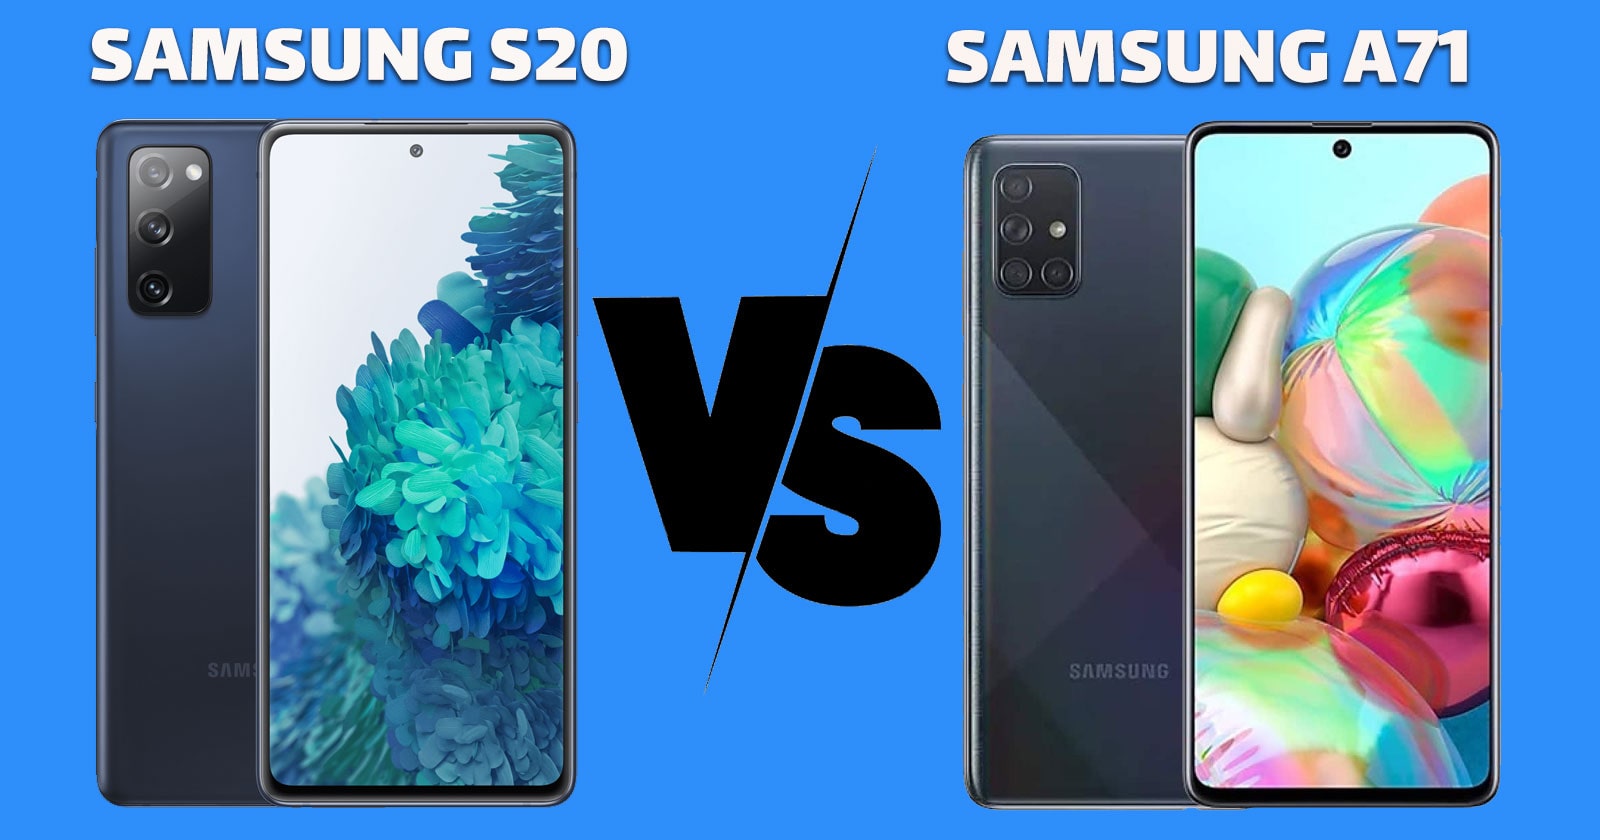 What Is the Difference Between Samsung S20 and A71